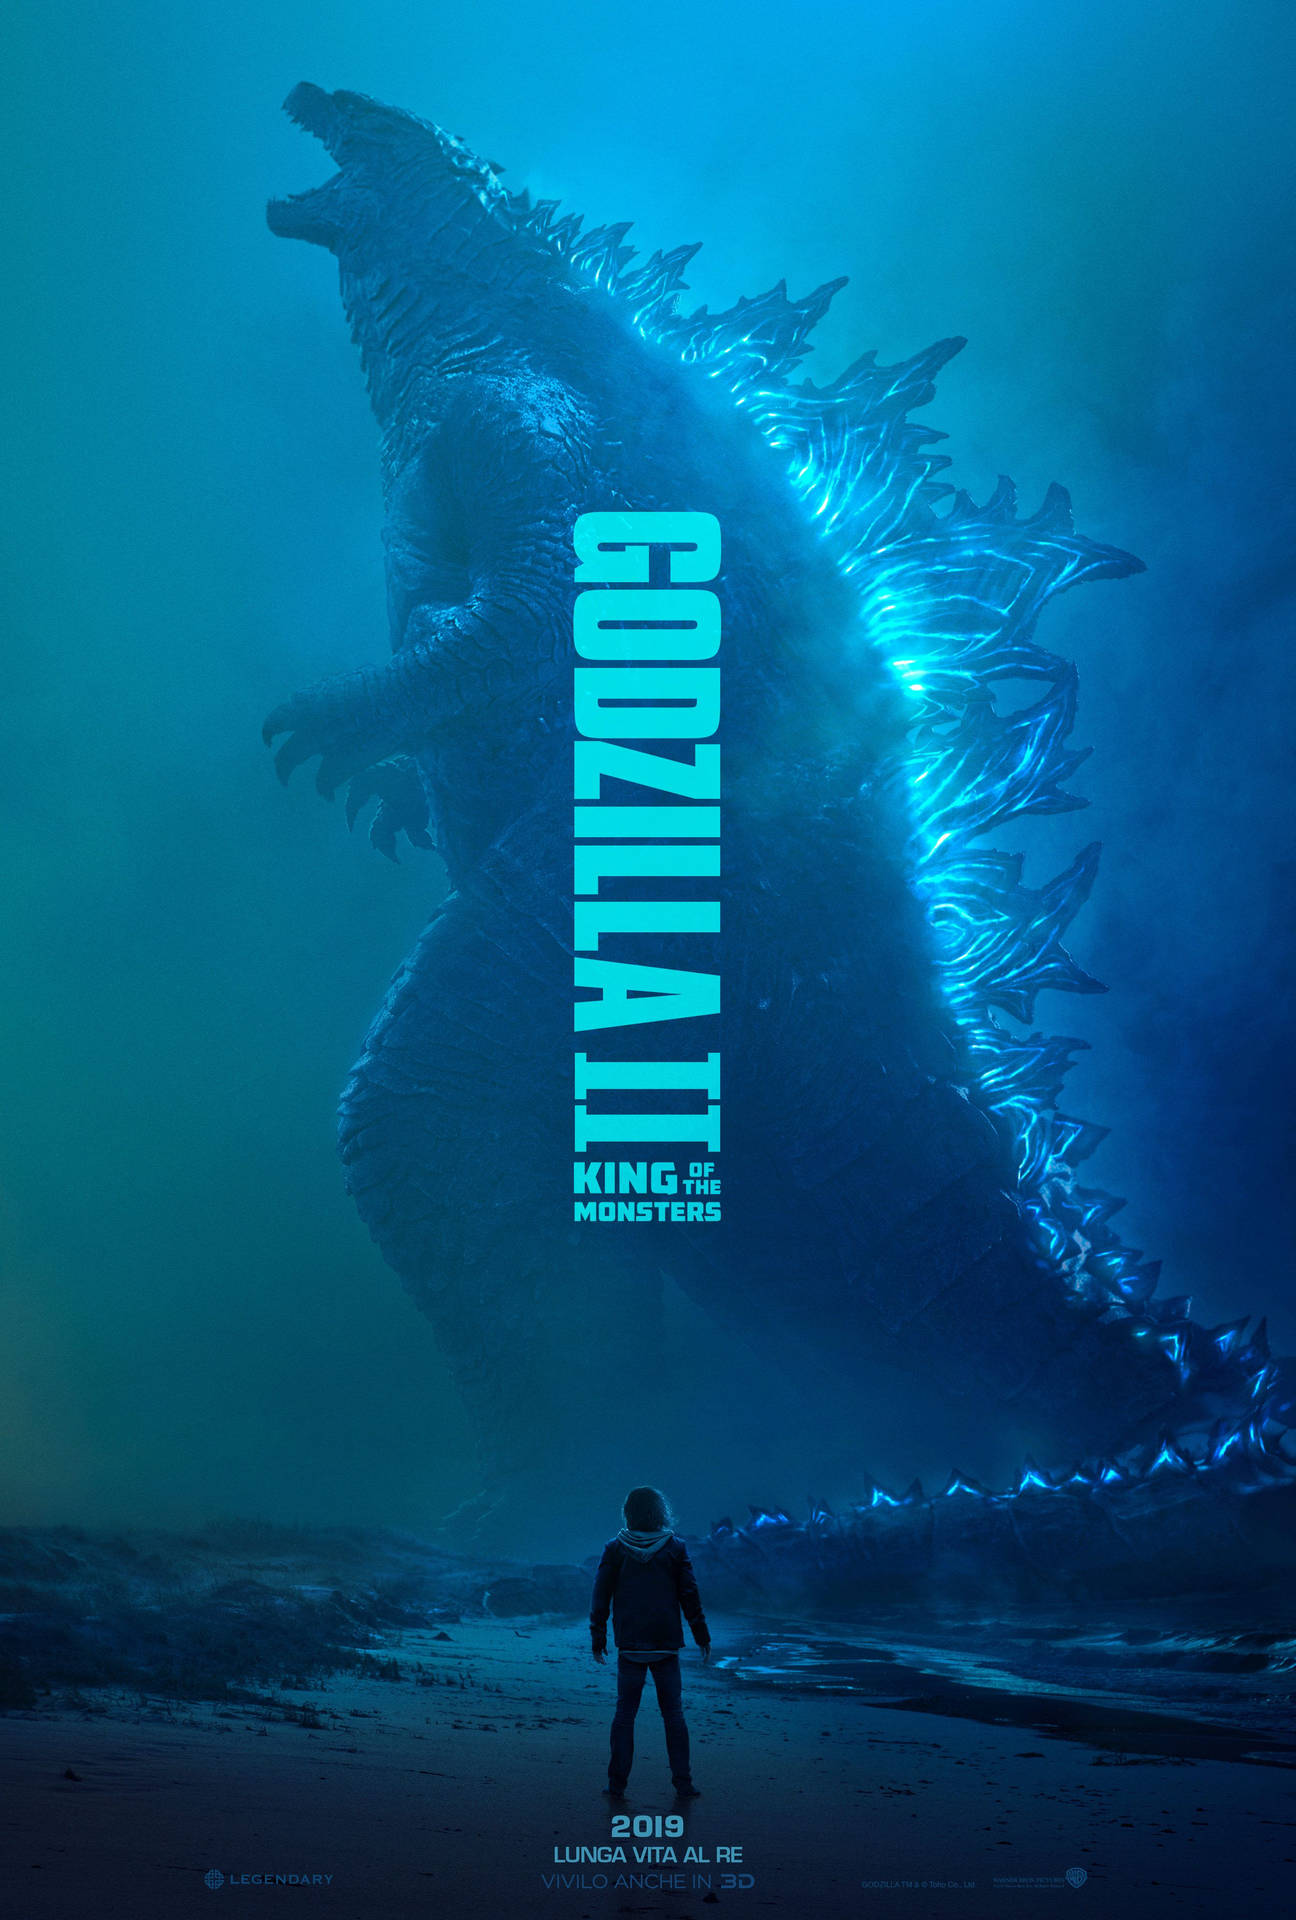 Wallpaper of Godzilla: King of the Monsters release poster